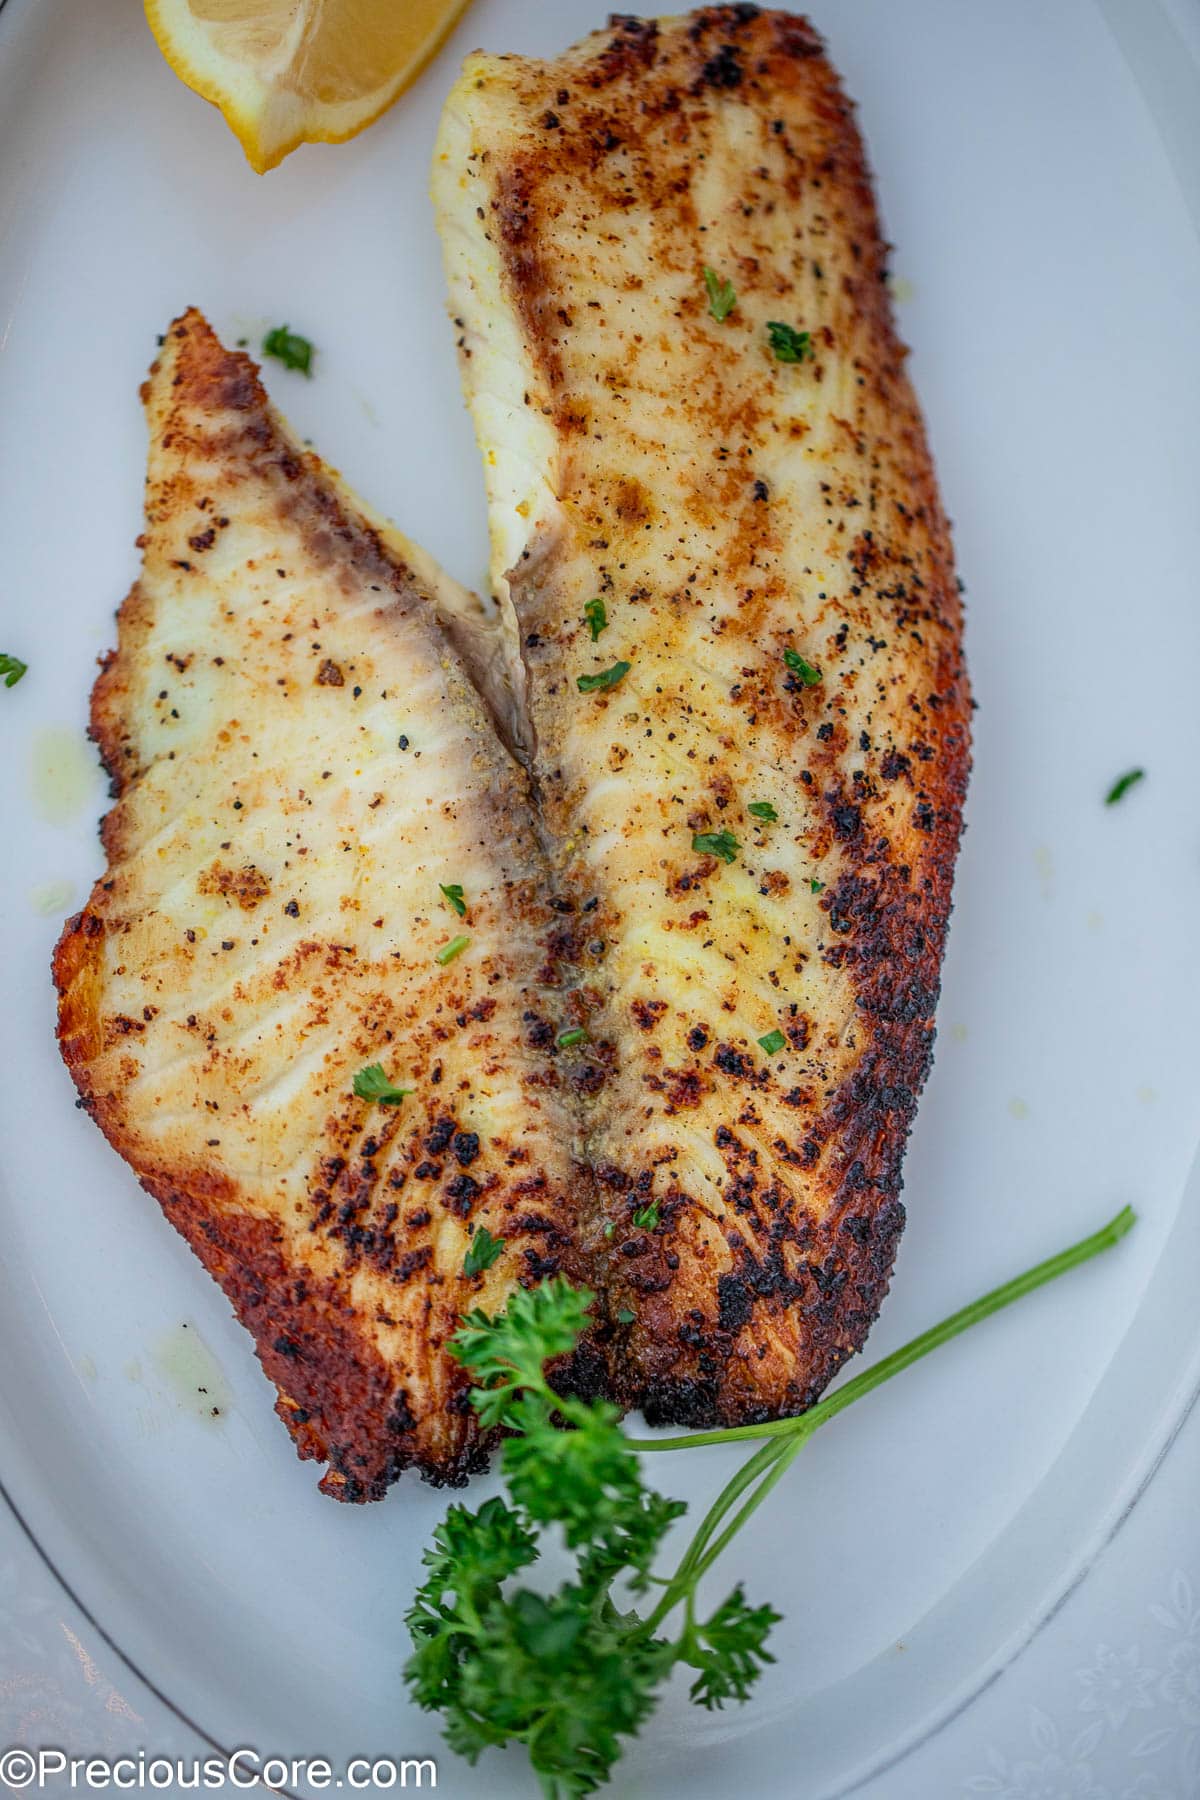 A cooked fish fillet garnished with minced parsley.